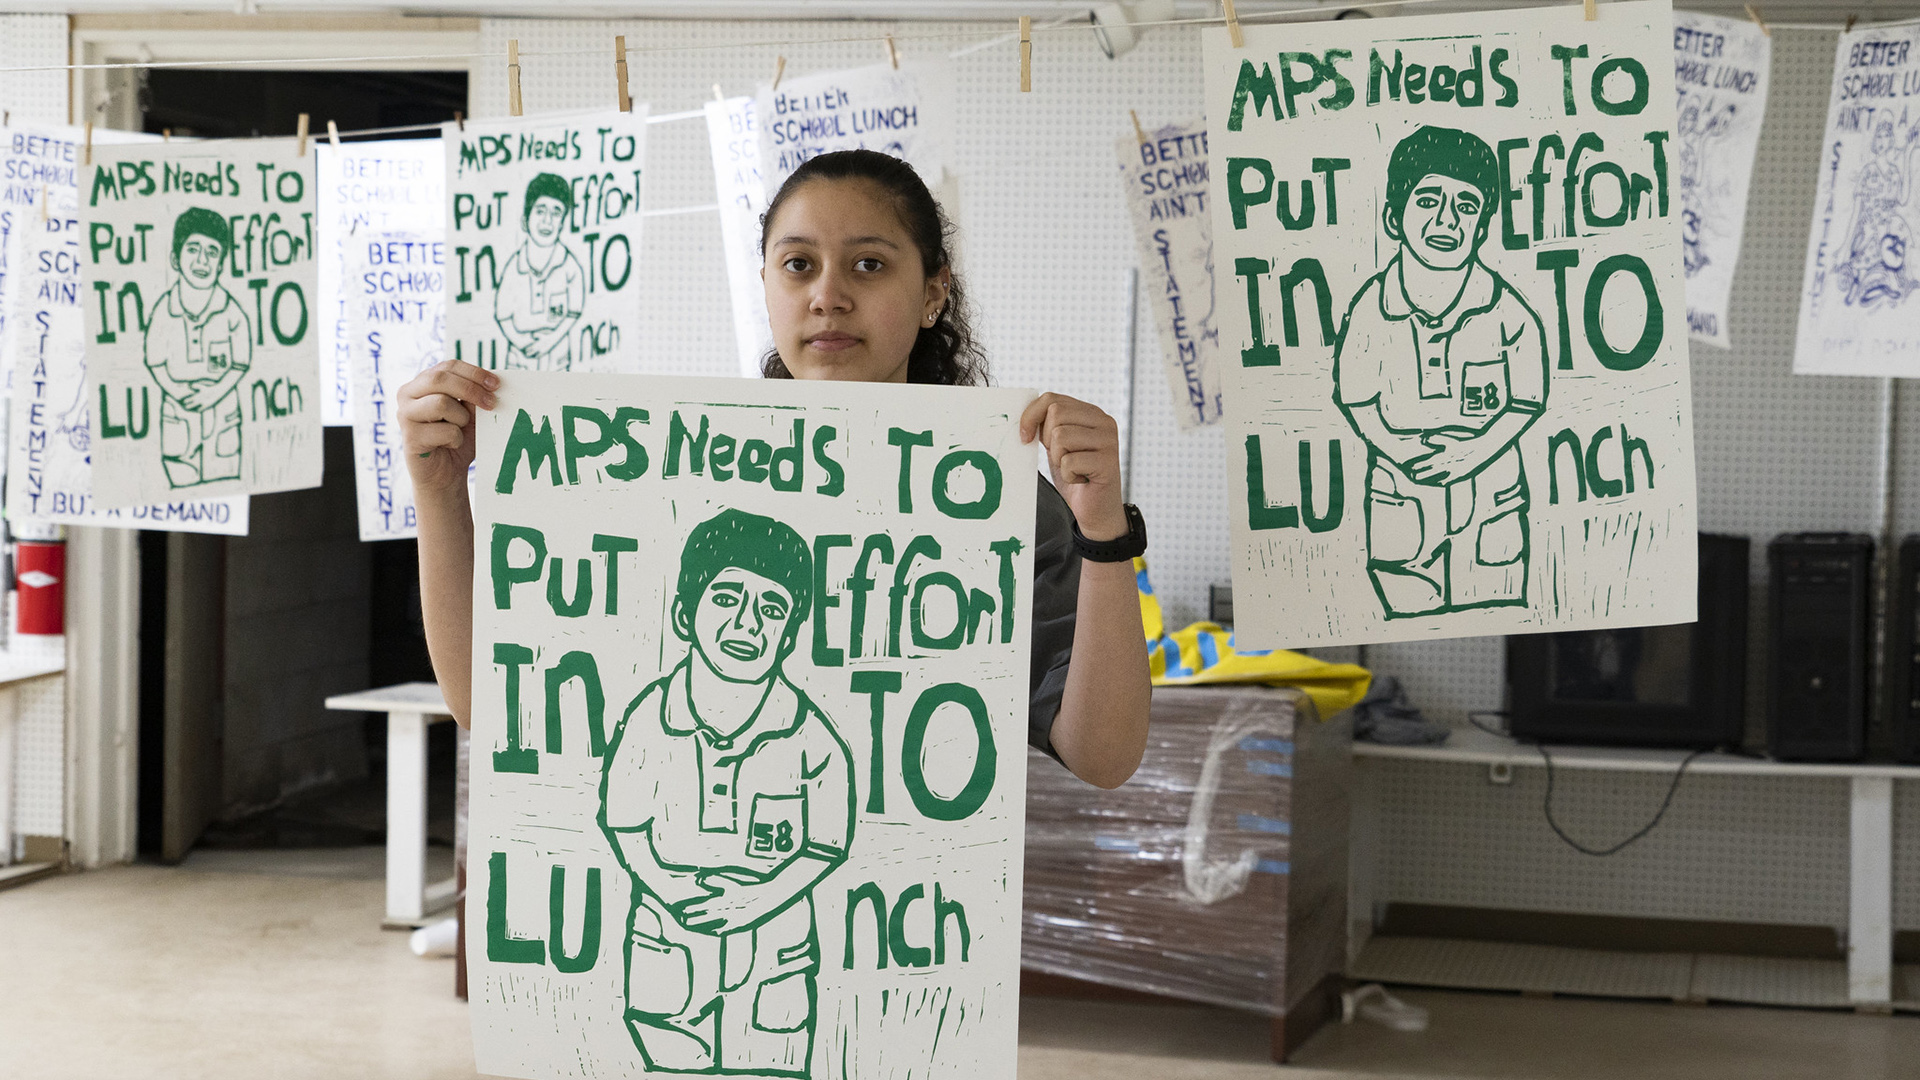 Doricela Herrera-Sanchez poses for a portrait while holding a screen-printed poster with a graphic of a person holding their stomach and the words "MPS Need To Put Effort Into Lunch," with additional posters of this design and others hanging on clotheslines in a room with pegboard walls.